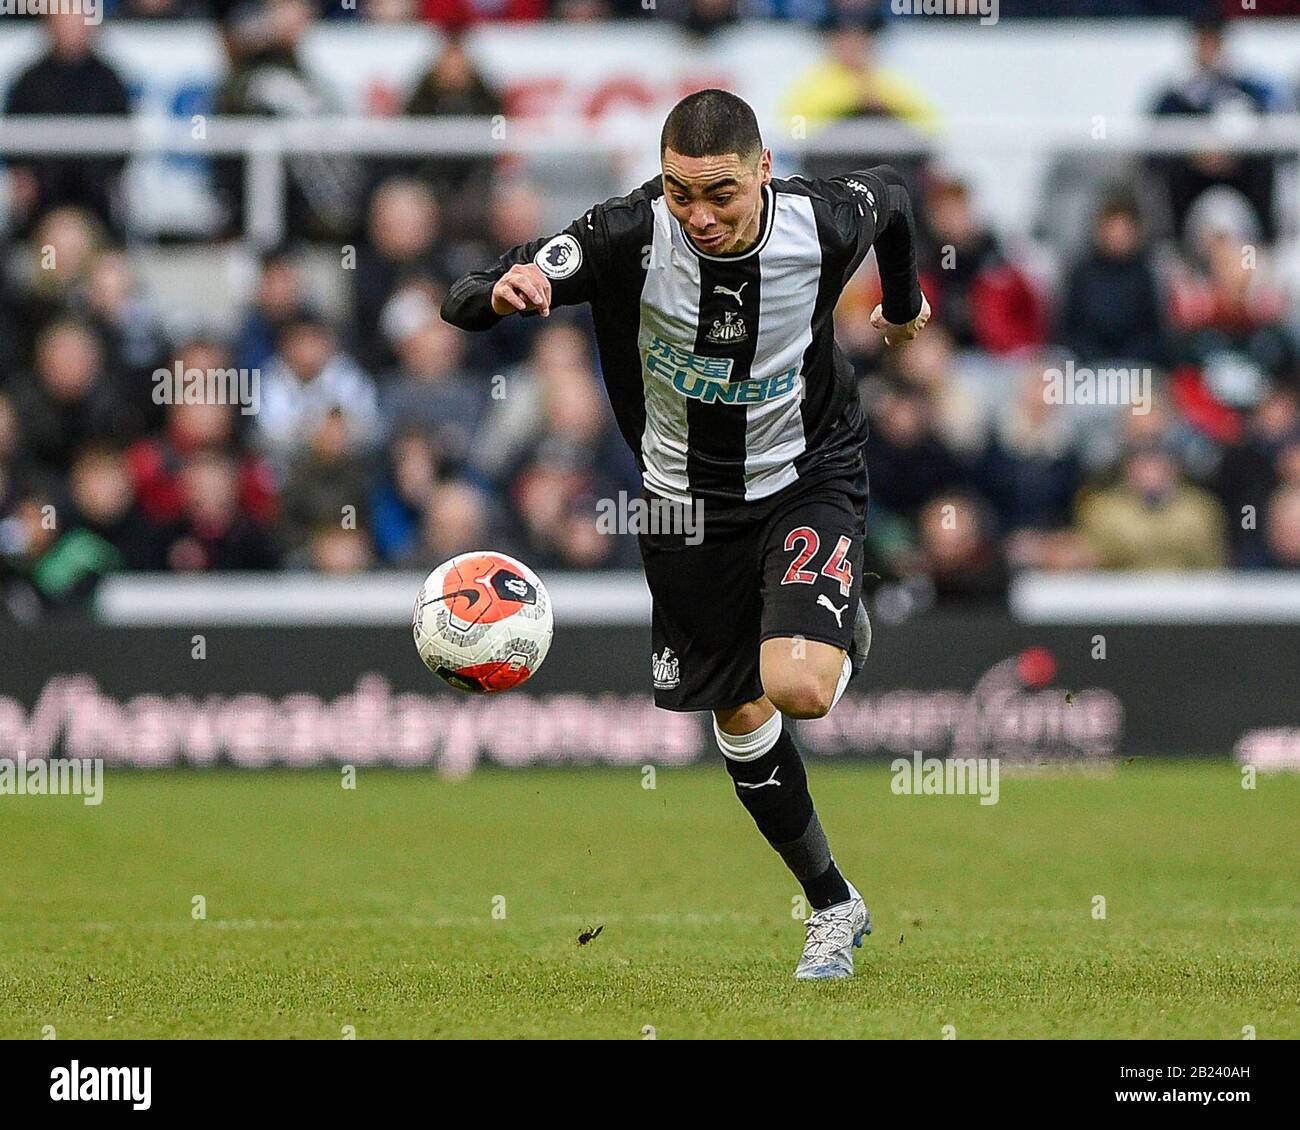 NEWCASTLE UPON TYNE, ENGLAND - FEBRUARY 29TH Miguel Almir-n (24) of Newcastle United in action during the Premier League match between Newcastle United and Burnley at St. James's Park, Newcastle on Saturday 29th February 2020. (Credit: Iam Burn | MI News) Photograph may only be used for newspaper and/or magazine editorial purposes, license required for commercial use Credit: MI News & Sport /Alamy Live News Stock Photo